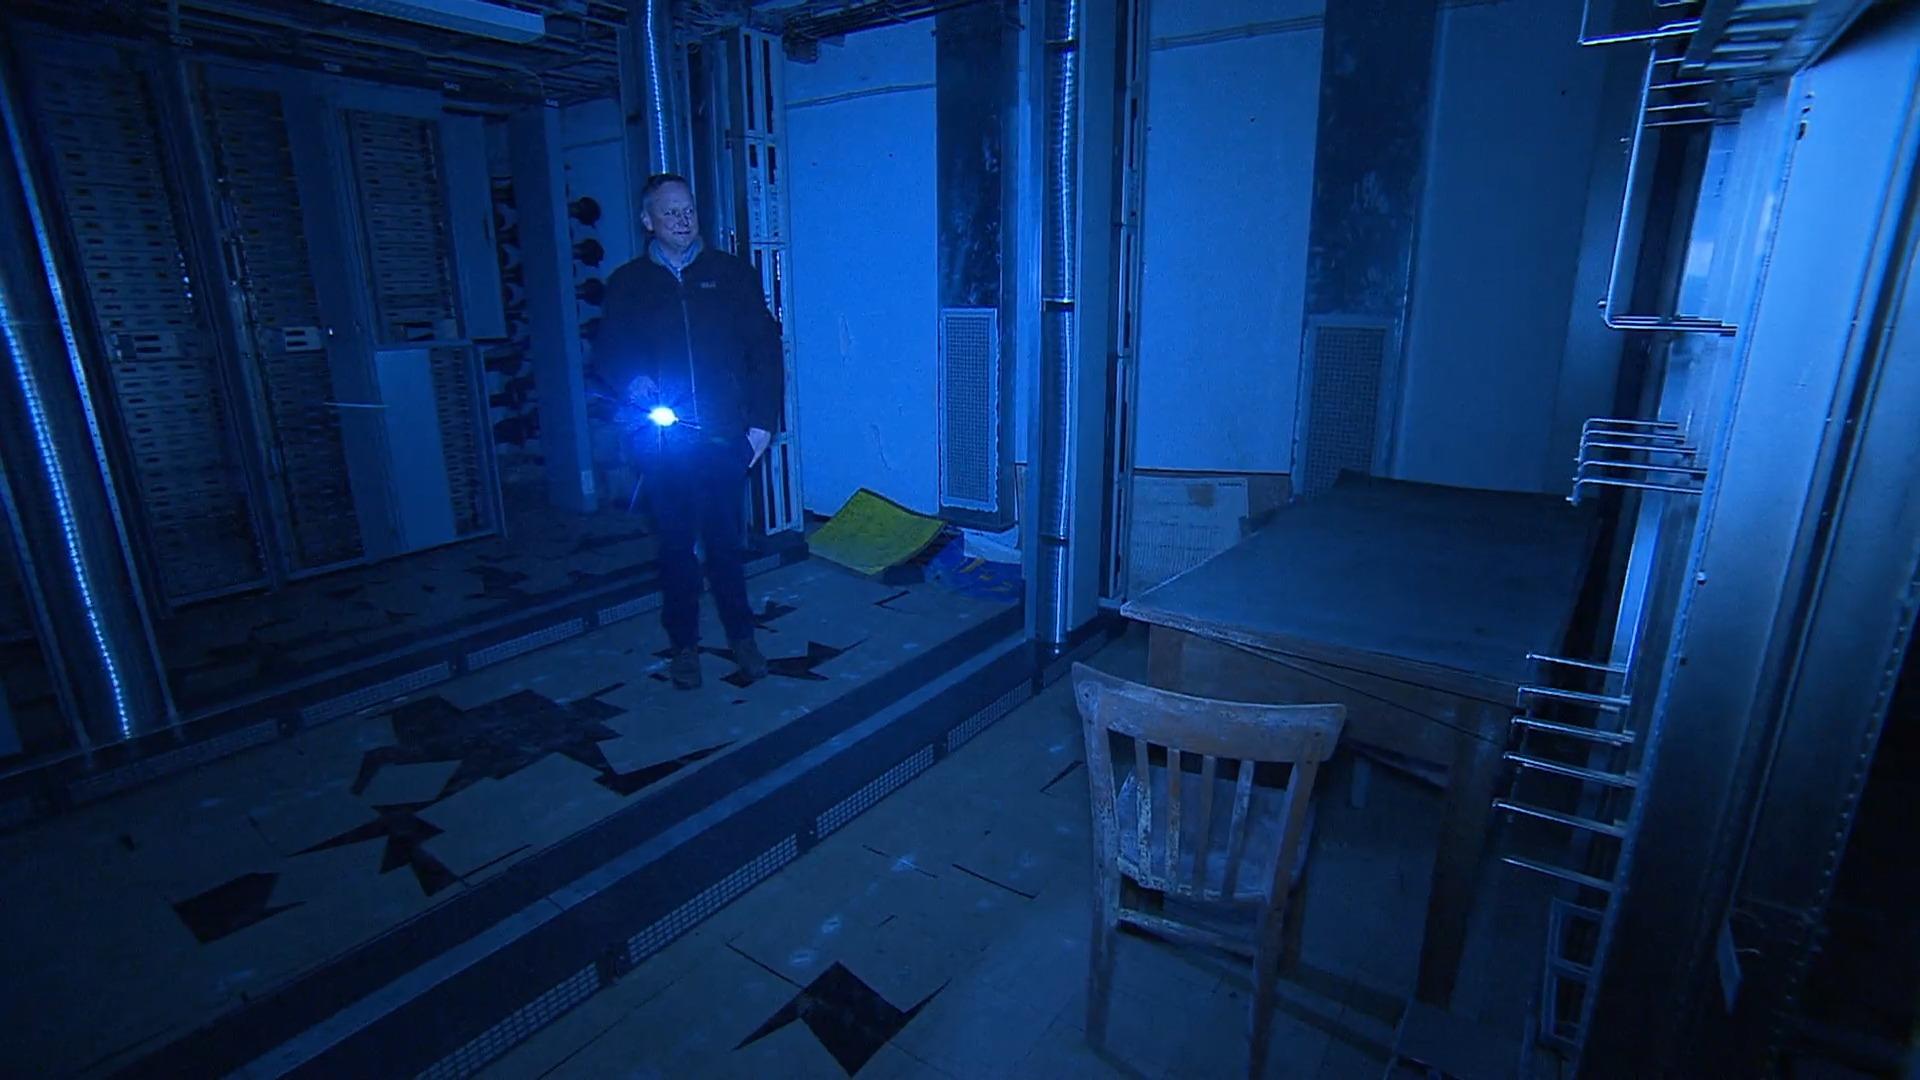 Detlef Planck shows us his nuclear bunker, which contains many ancient treasures